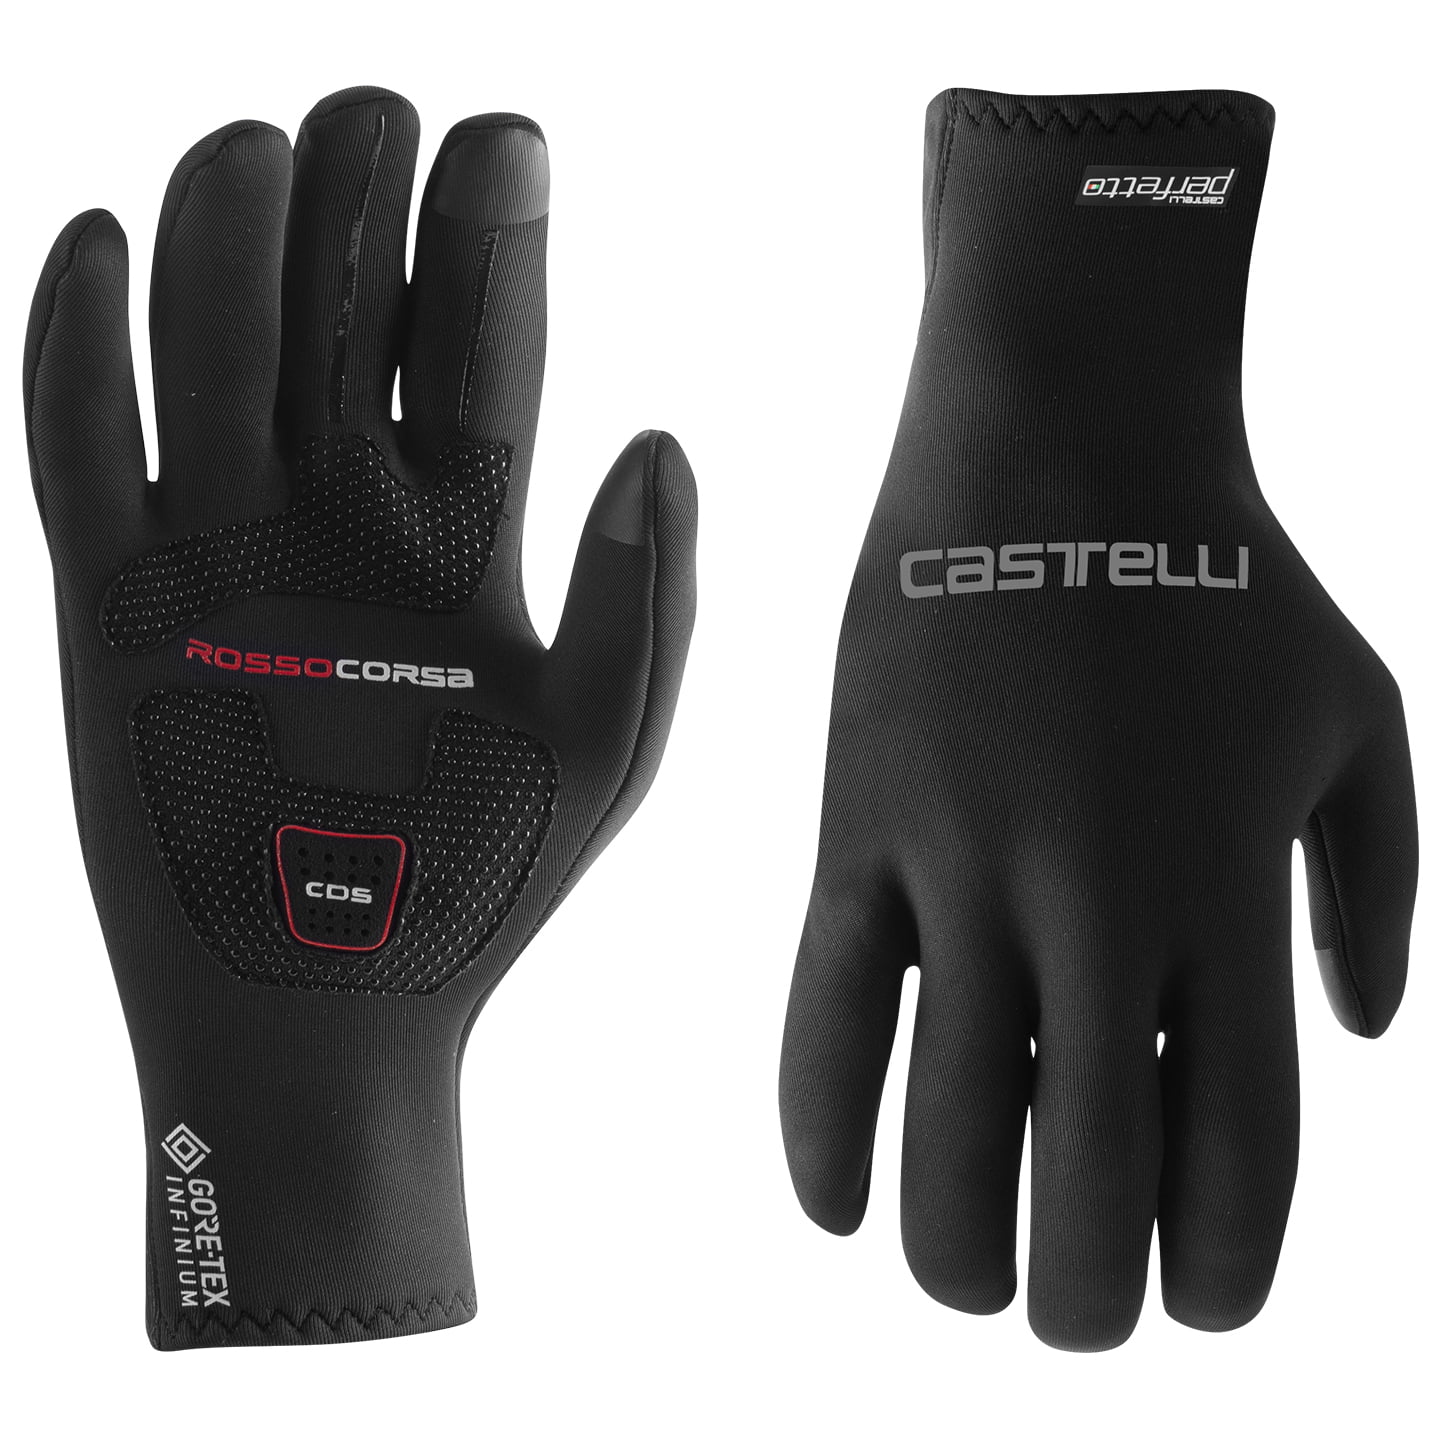 CASTELLI Perfetto Max Winter Gloves Winter Cycling Gloves, for men, size S, Cycling gloves, Cycling clothing